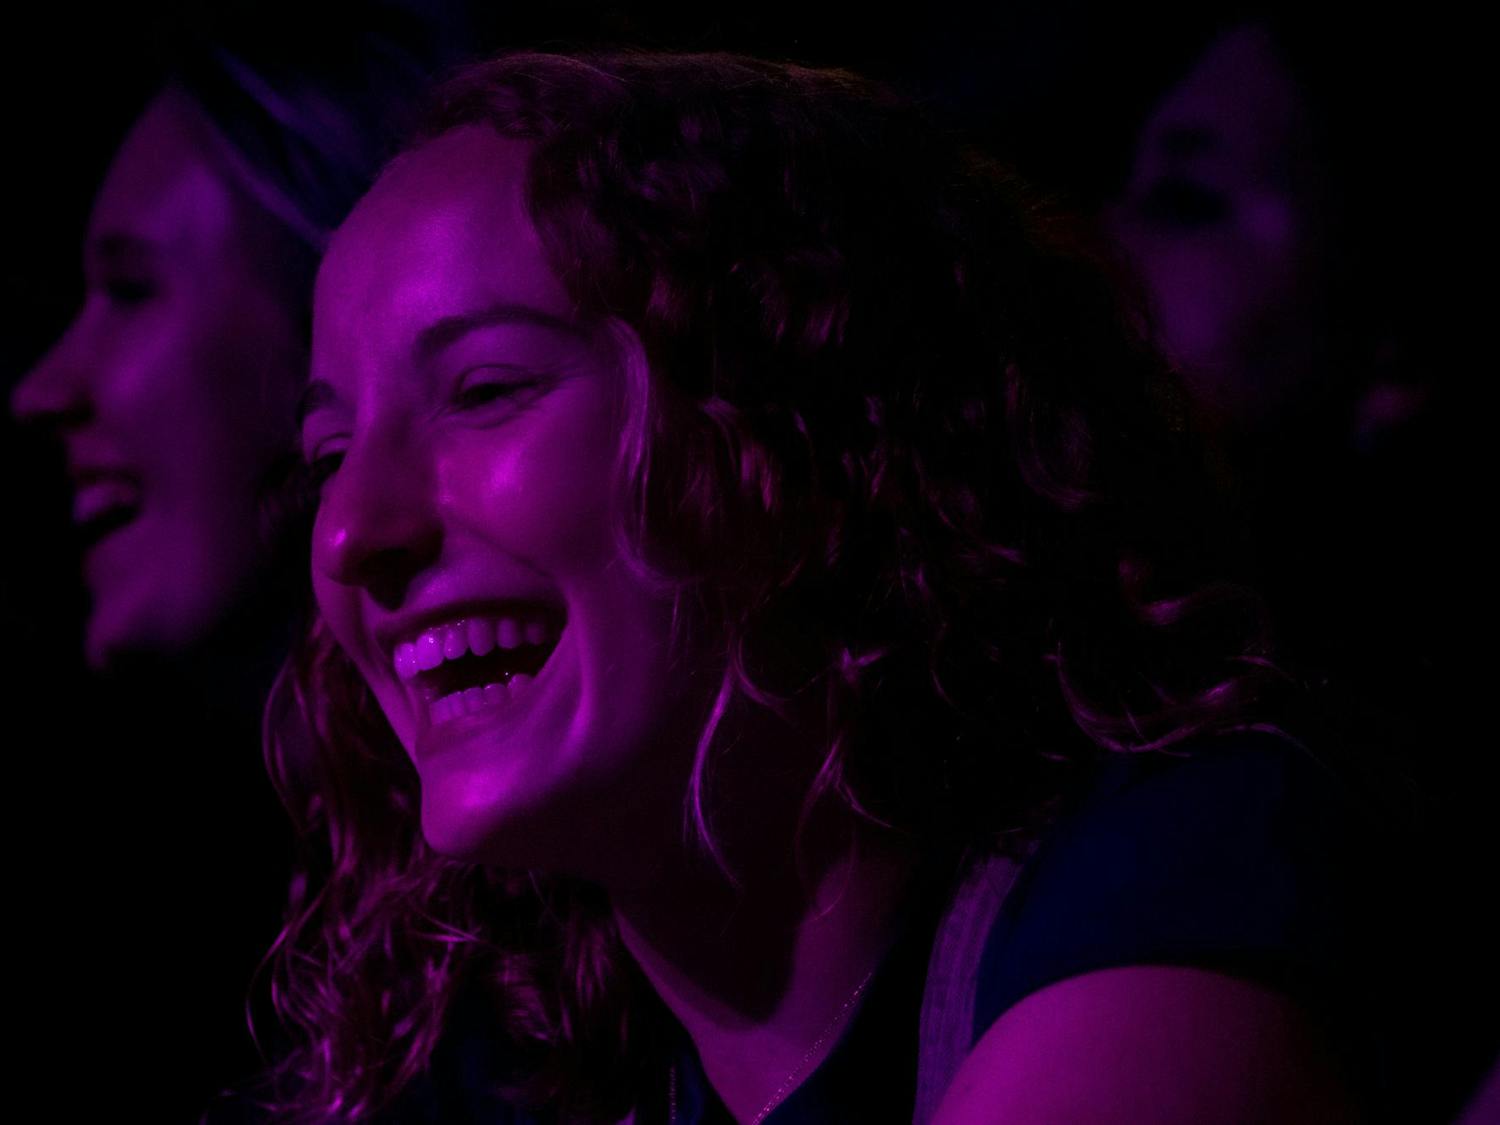 First-year nursing student Shannon Deutsch smiles while The Third Floor's performs at Cockstock. The Third Floor's performance included a cover of "Valerie" by Amy Winehouse that excited many concertgoers.